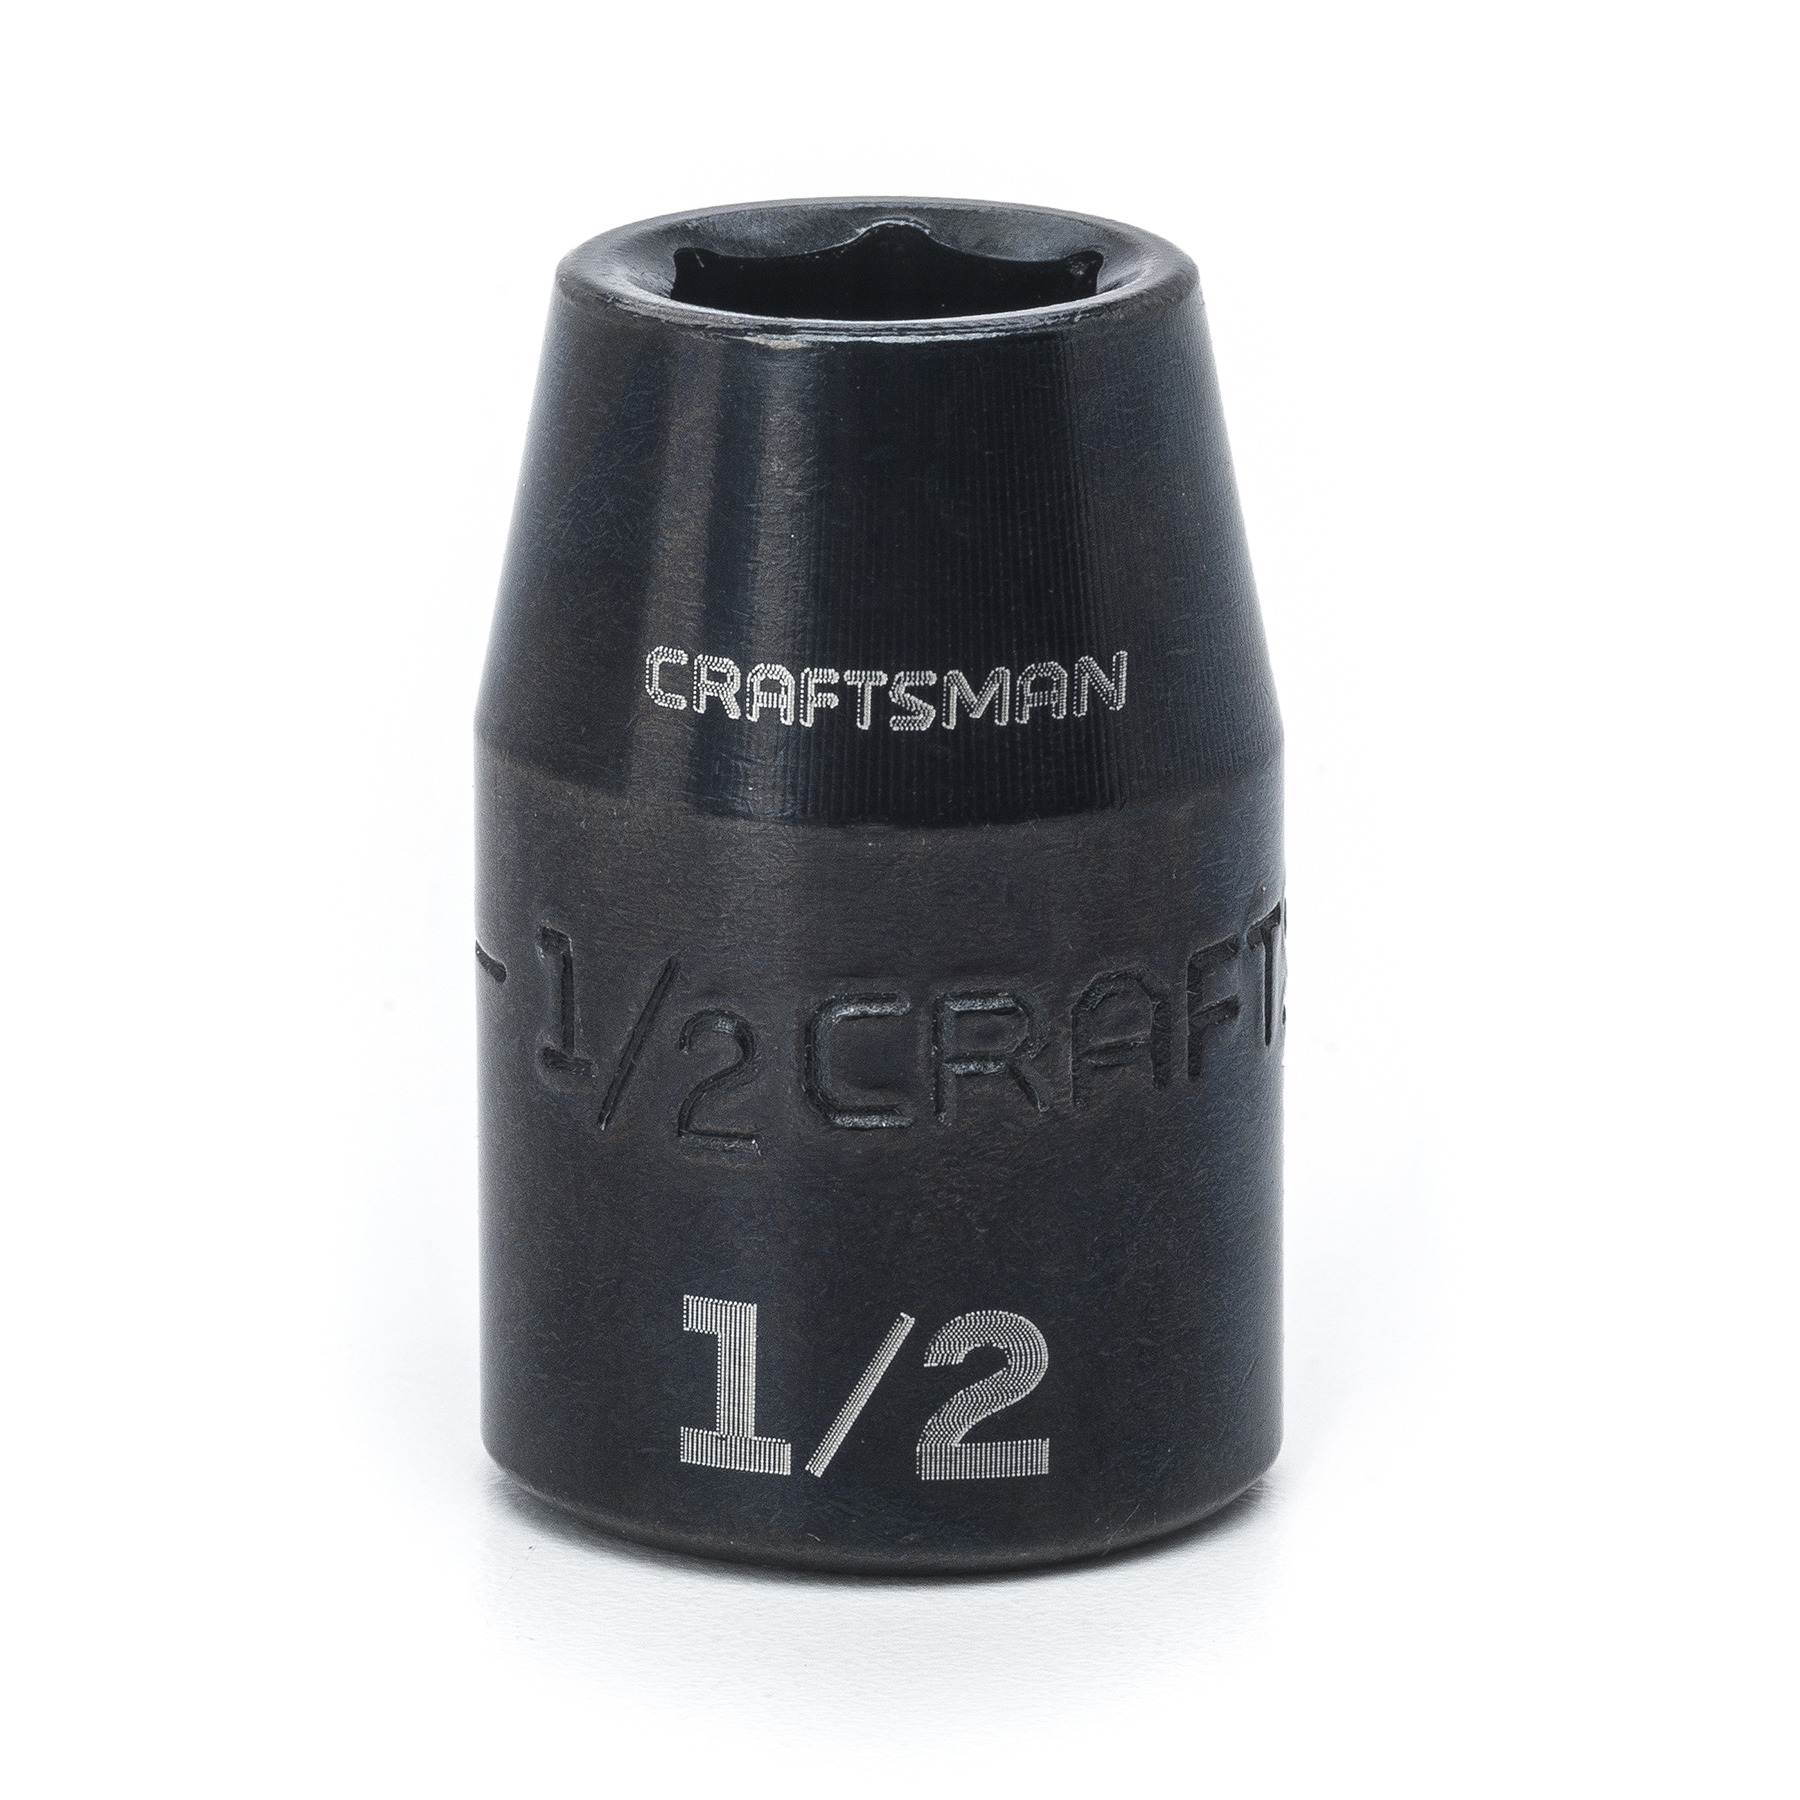 Craftsman 1/2 in., 6 pt. 1/2 in. Drive, Easy-To-Read Impact Socket